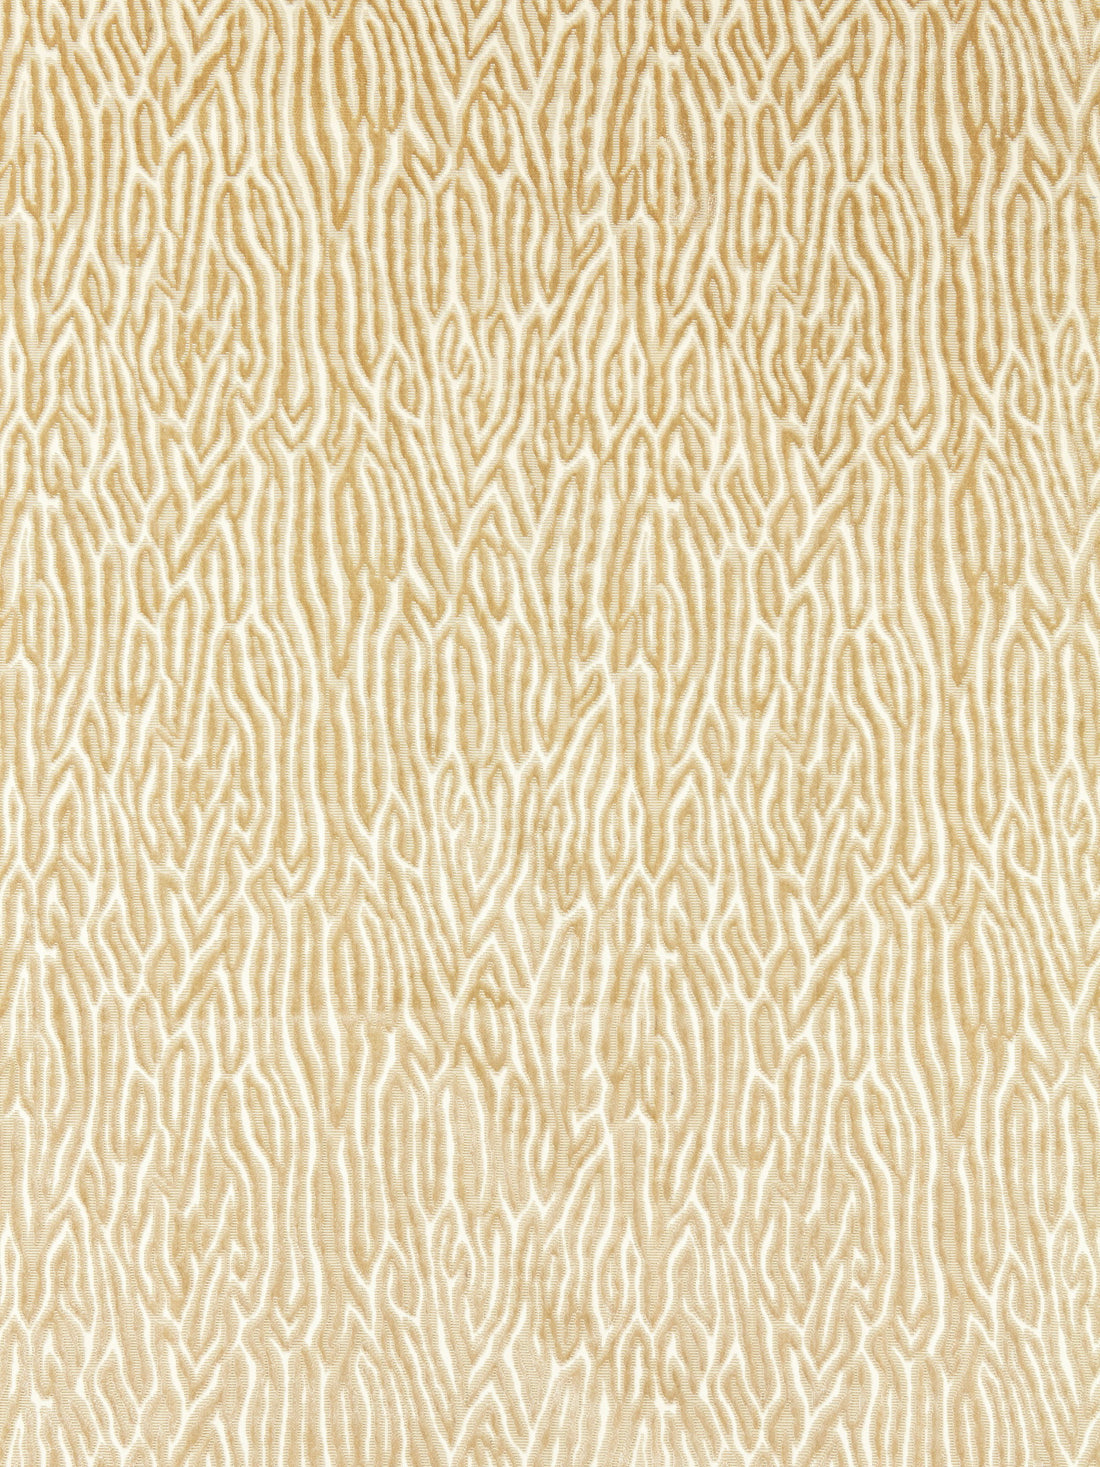 Faux Bois Velvet fabric in sand color - pattern number SC 000227076 - by Scalamandre in the Scalamandre Fabrics Book 1 collection